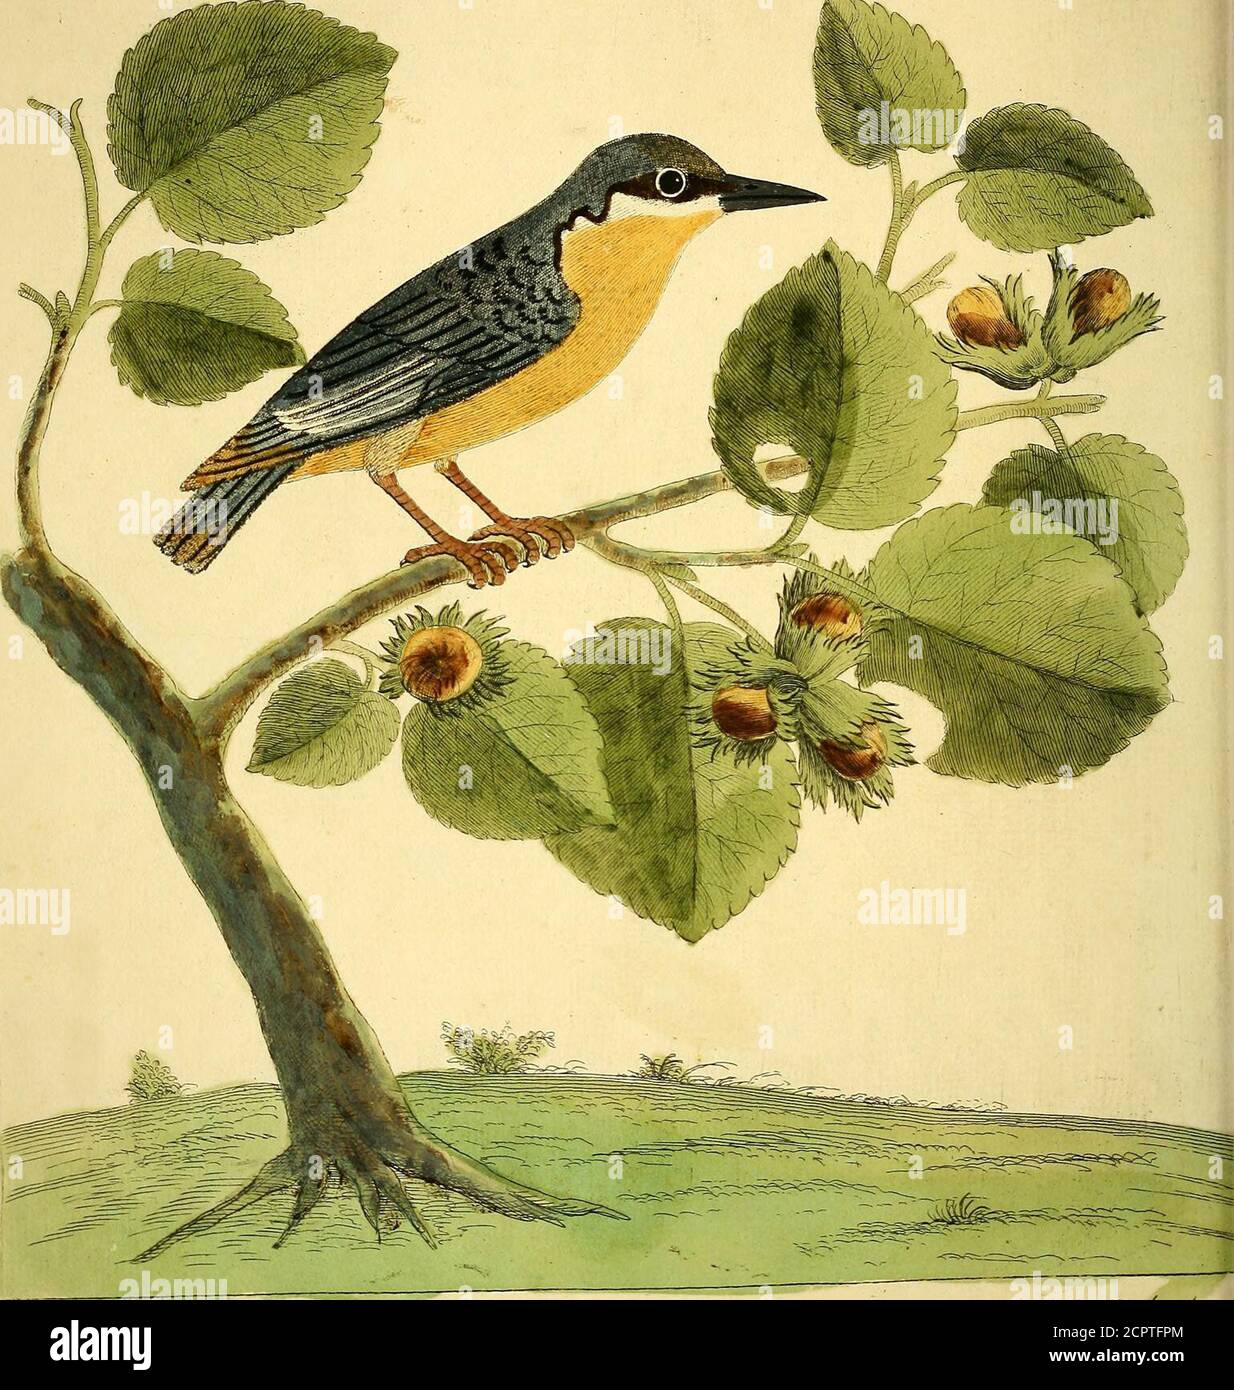 . A natural history of birds : illustrated with a hundred and one copper plates, curiously engraven from the life . Ficic&lt;f jfiMcunu^ Tu^er The qreat Ir/a^A Tfj^o-dp^^ker #fs^v^. Jt^fa Jlti J^idt^ Ct/iert-fcf. zAr^ PluiA^i^A. ( 27 ) The Nuthatch Sitta Jeu Picus cineru?. Numb. XXVUL. ITS Weight was one Ounce; its Length, from the Tip of the Billto the Endof;the Tail,was five Inches and three quarters, to the End of the Toes fix Inches 5 the:Bill was ftreight, triangular, black above, underneath towards the Throat white, al-moft an Inch long, meafuring from the Tip to the Angles of the Mouth; Stock Photo